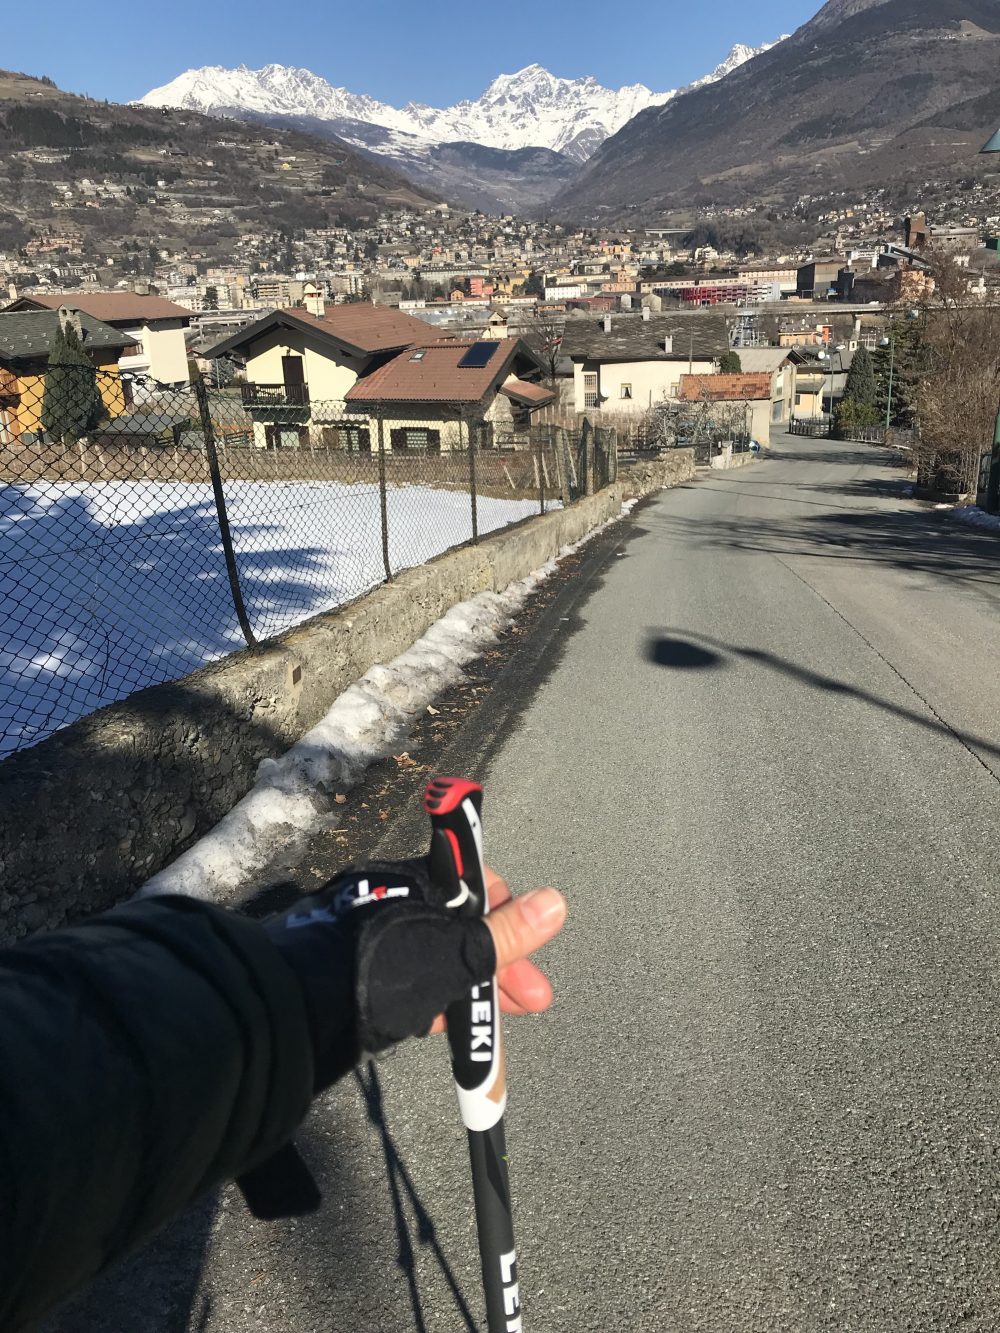 Nodic walking in Aosta-Pont Suaz. Something to do everyday and even when you cannot ski! Training in the off-season for the ski-season.